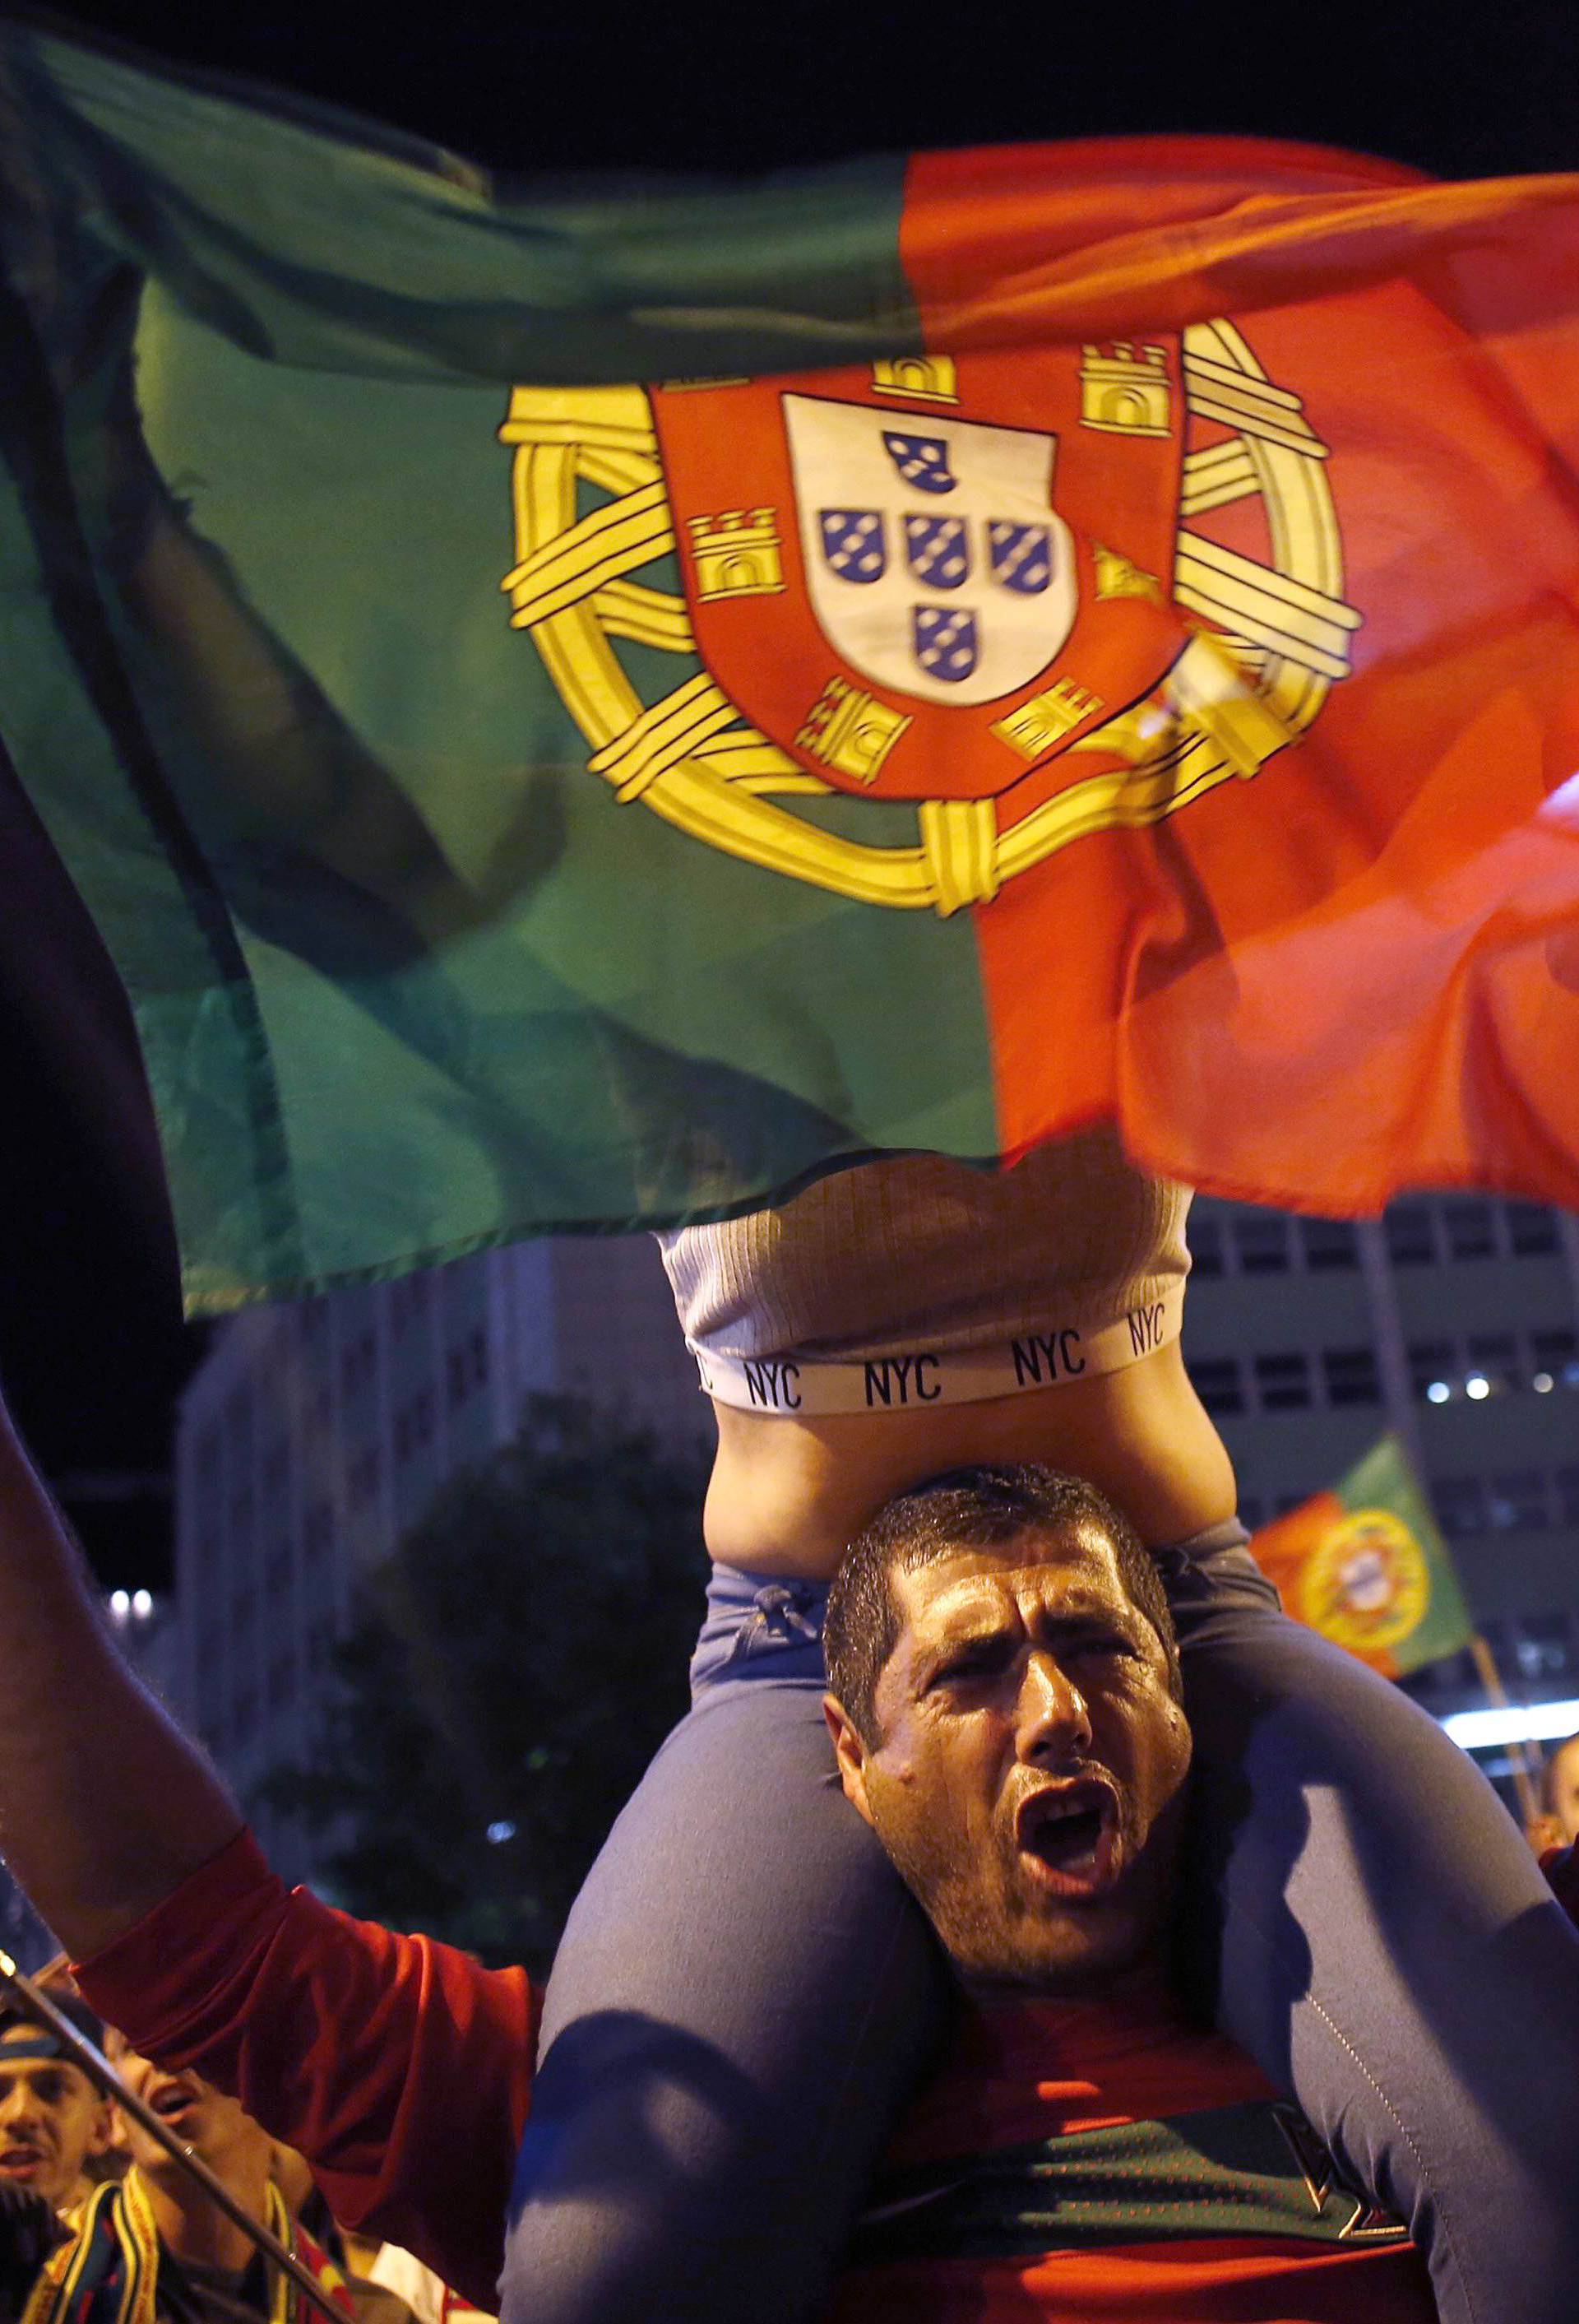 Fans of Portugal react after the Euro 2016 final between Portugal and France in Lisbon